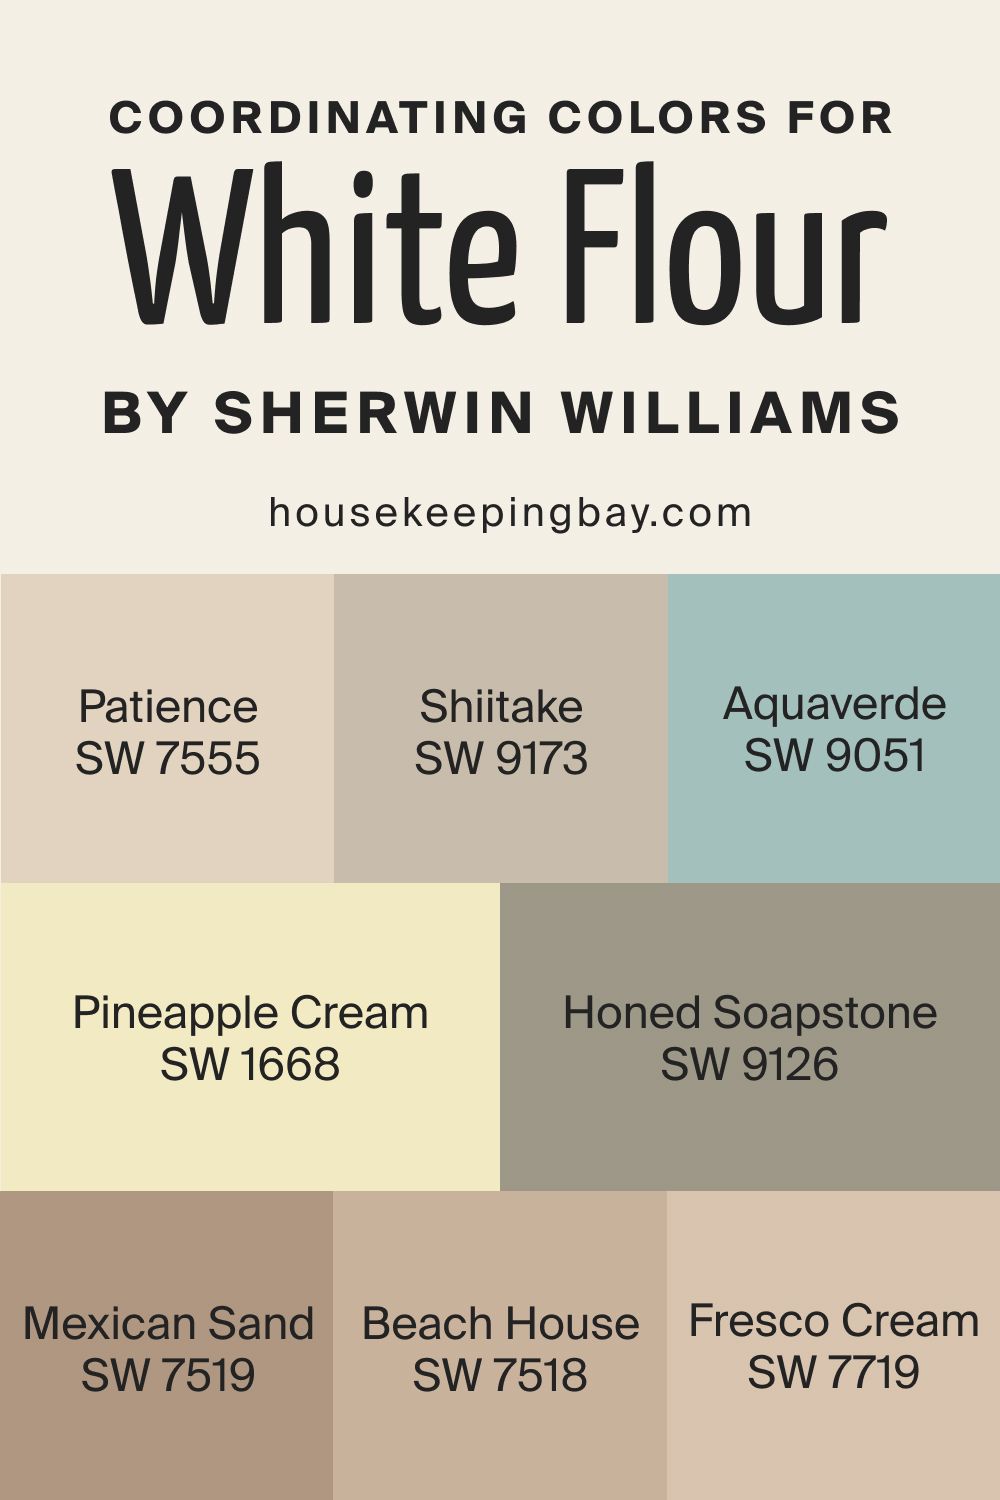 Coordinating Colors for SW White Flour by Sherwin Williams